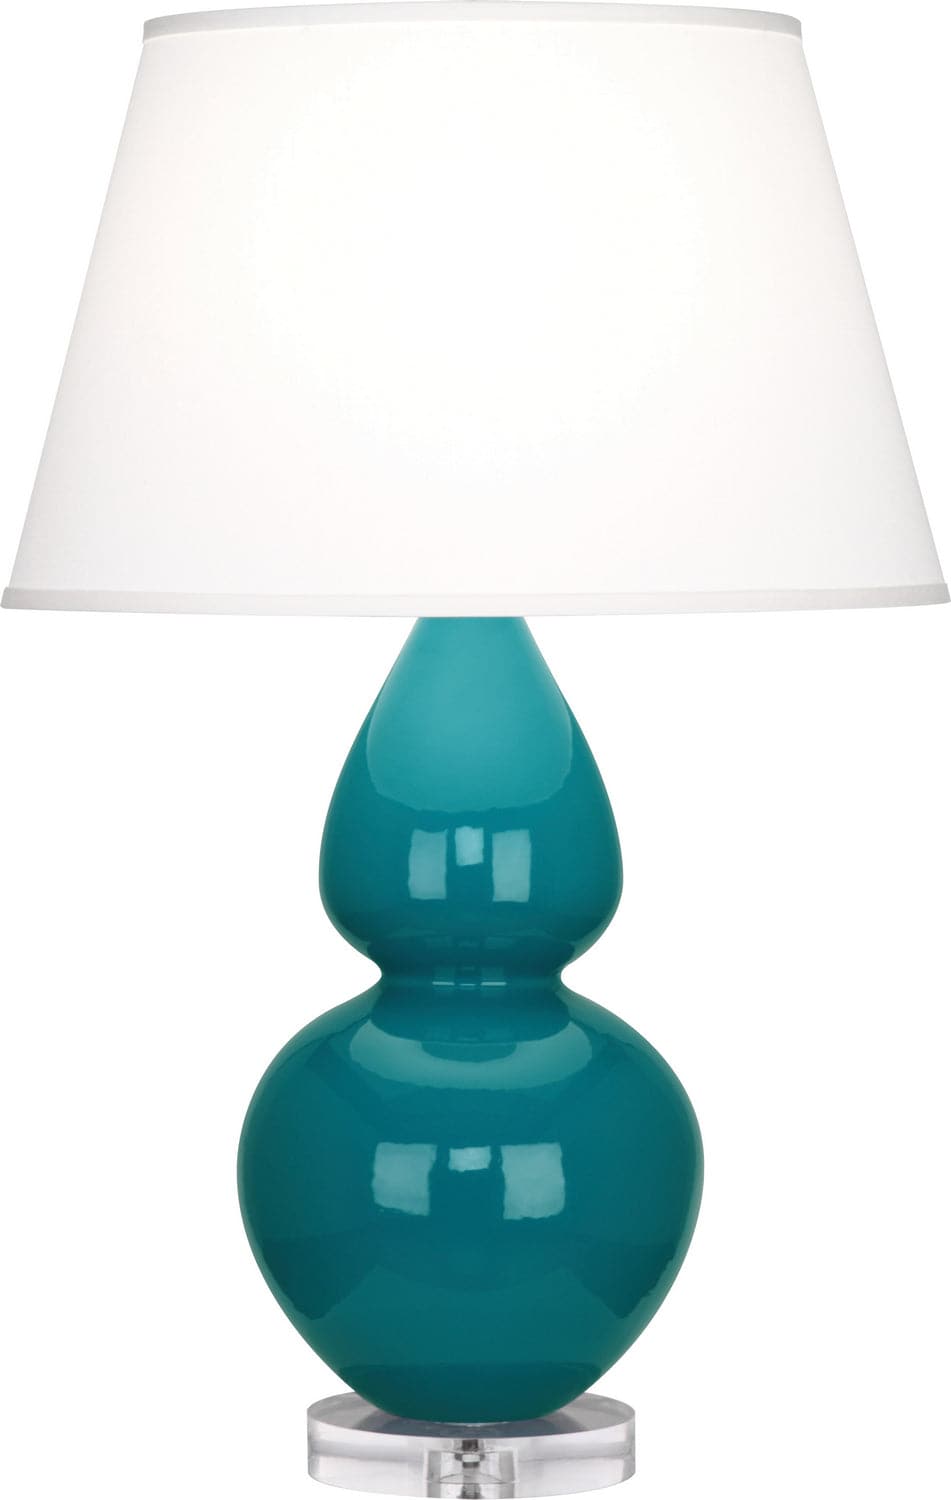 Robert Abbey - A753X - One Light Table Lamp - Double Gourd - Peacock Glazed w/Lucite Base